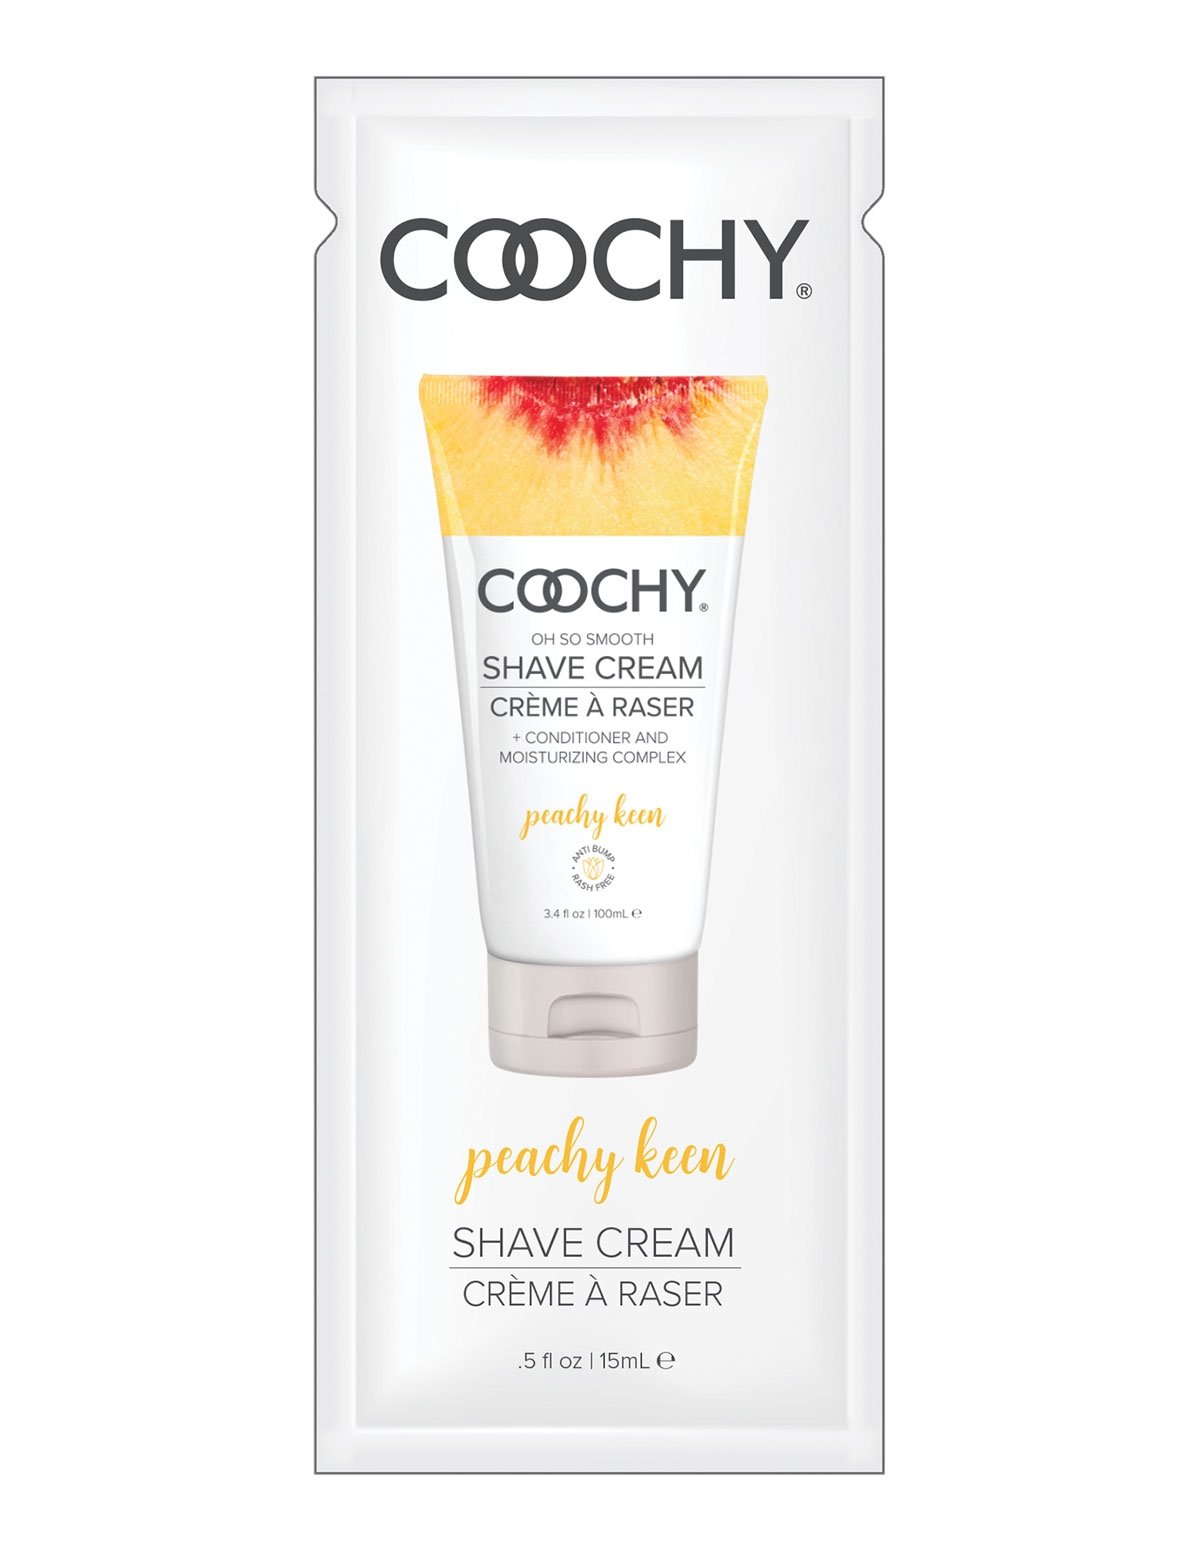 alternate image for Coochy Cream Foil Packet - Peachy Keen